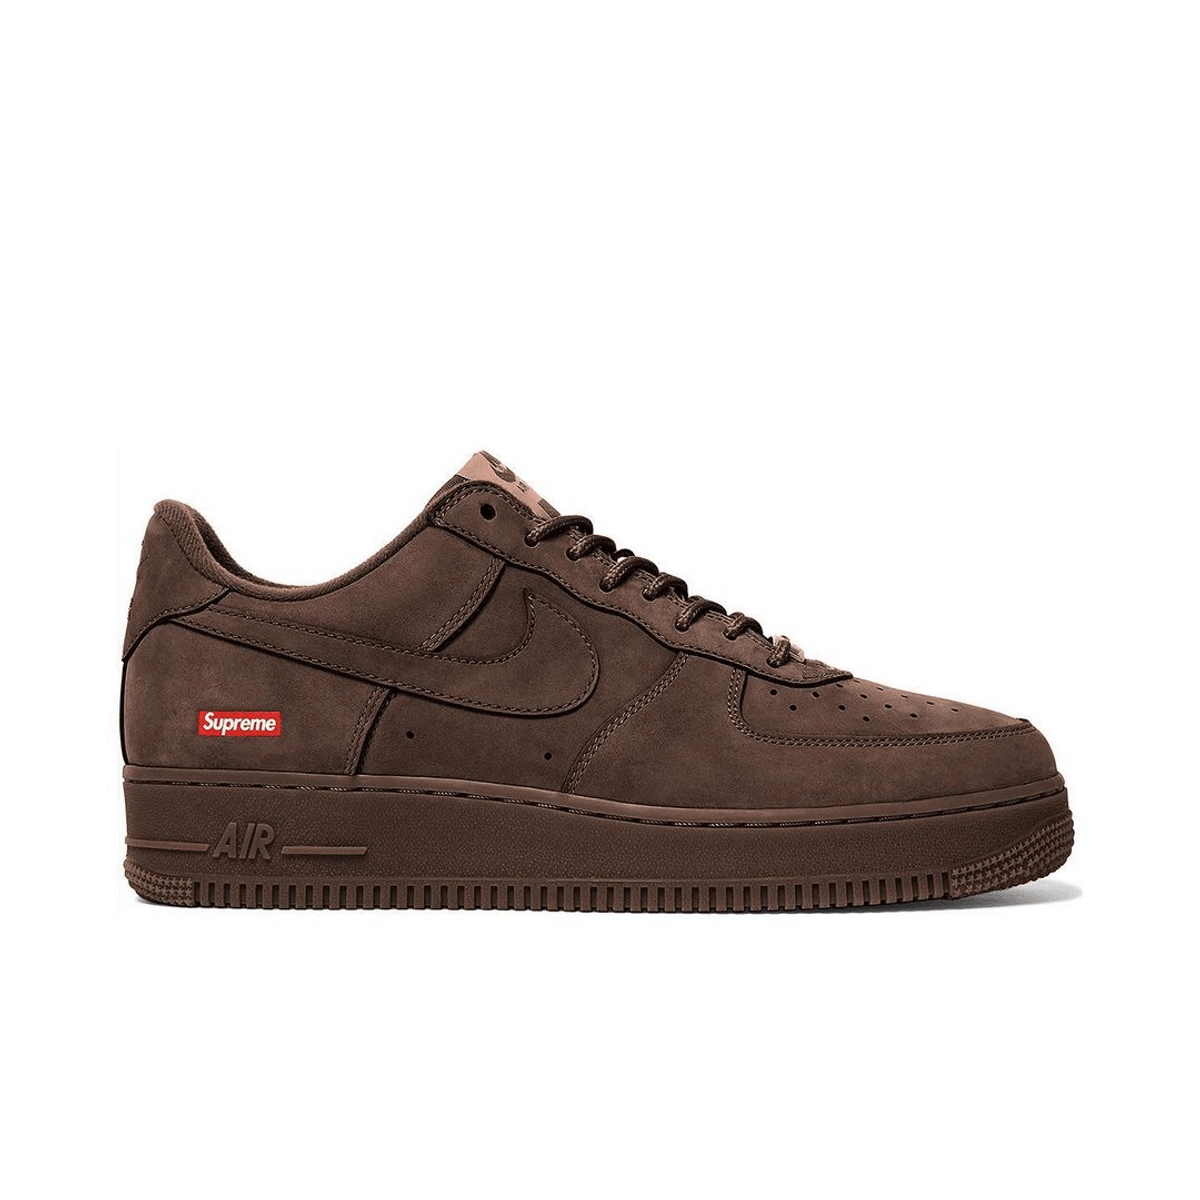 A New Supreme x Air Force 1 Low Collaboration Has Been Revealed In Baroque Brown